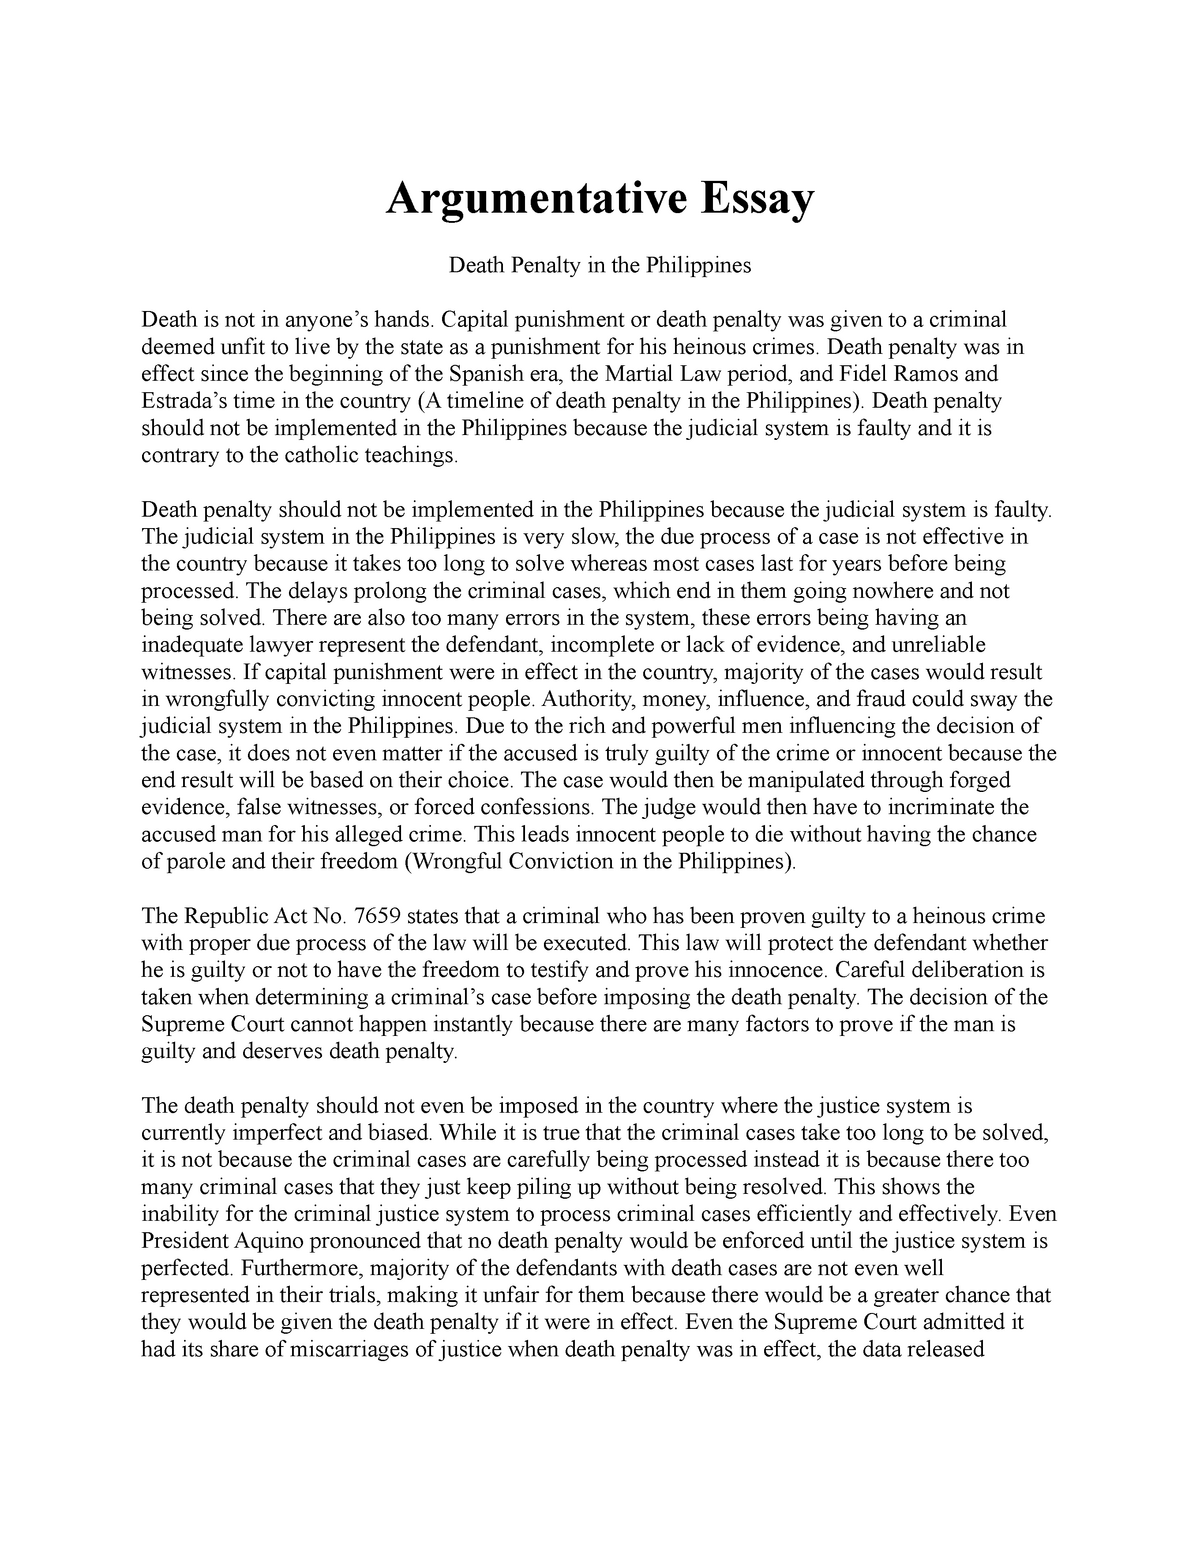 pro death penalty in the philippines argumentative essay